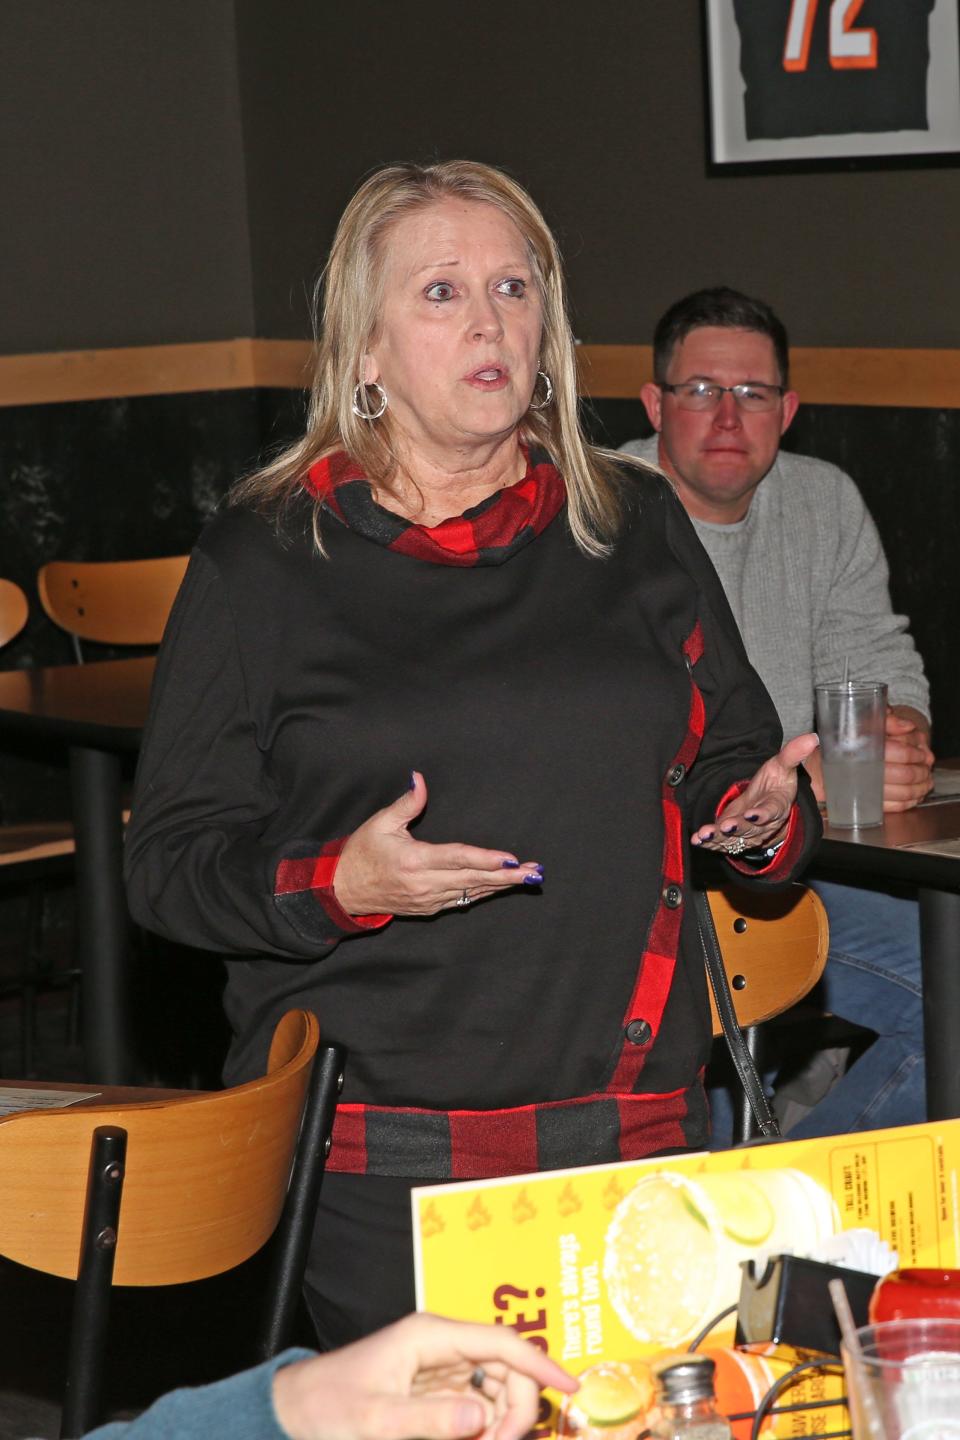 Judge Cindi Welty, with the Sandusky County Court 1 in Clyde, speaks at the Sandusky County Republican meeting on Wednesday.